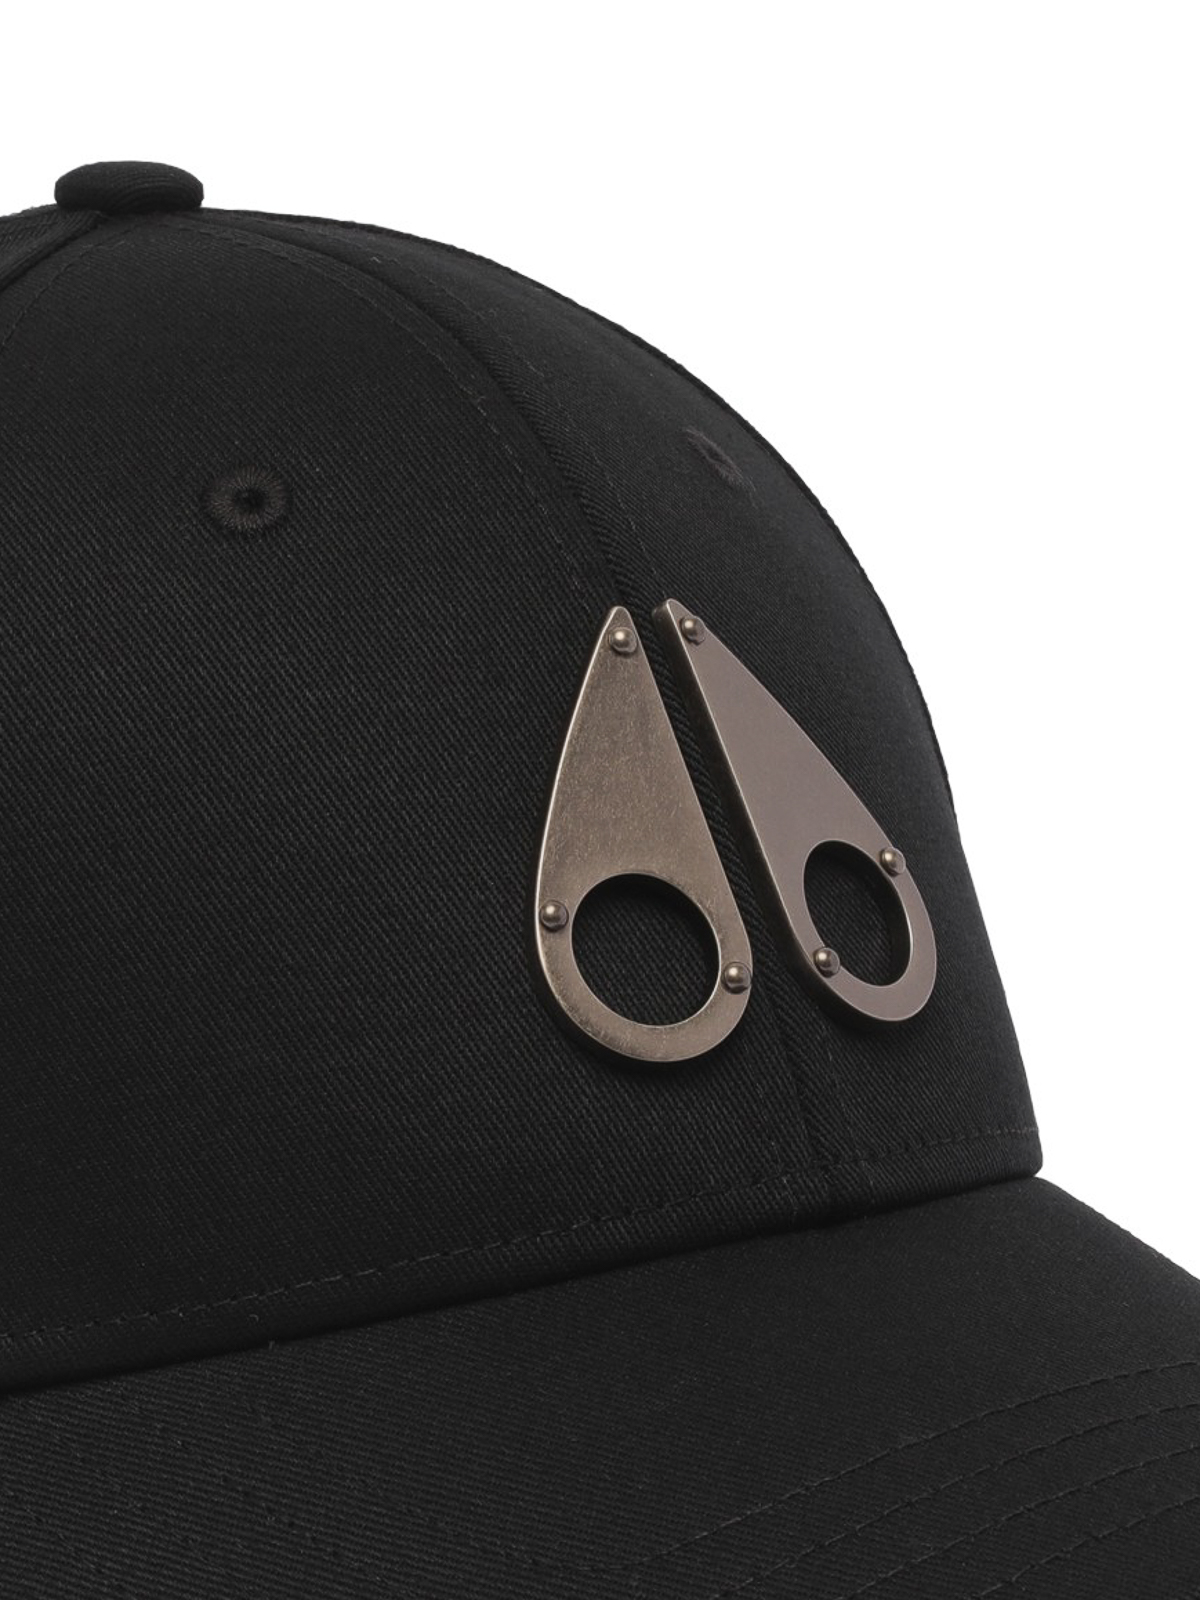 Hats and caps Moose Knuckles - Baseball cap with frontal silver logo